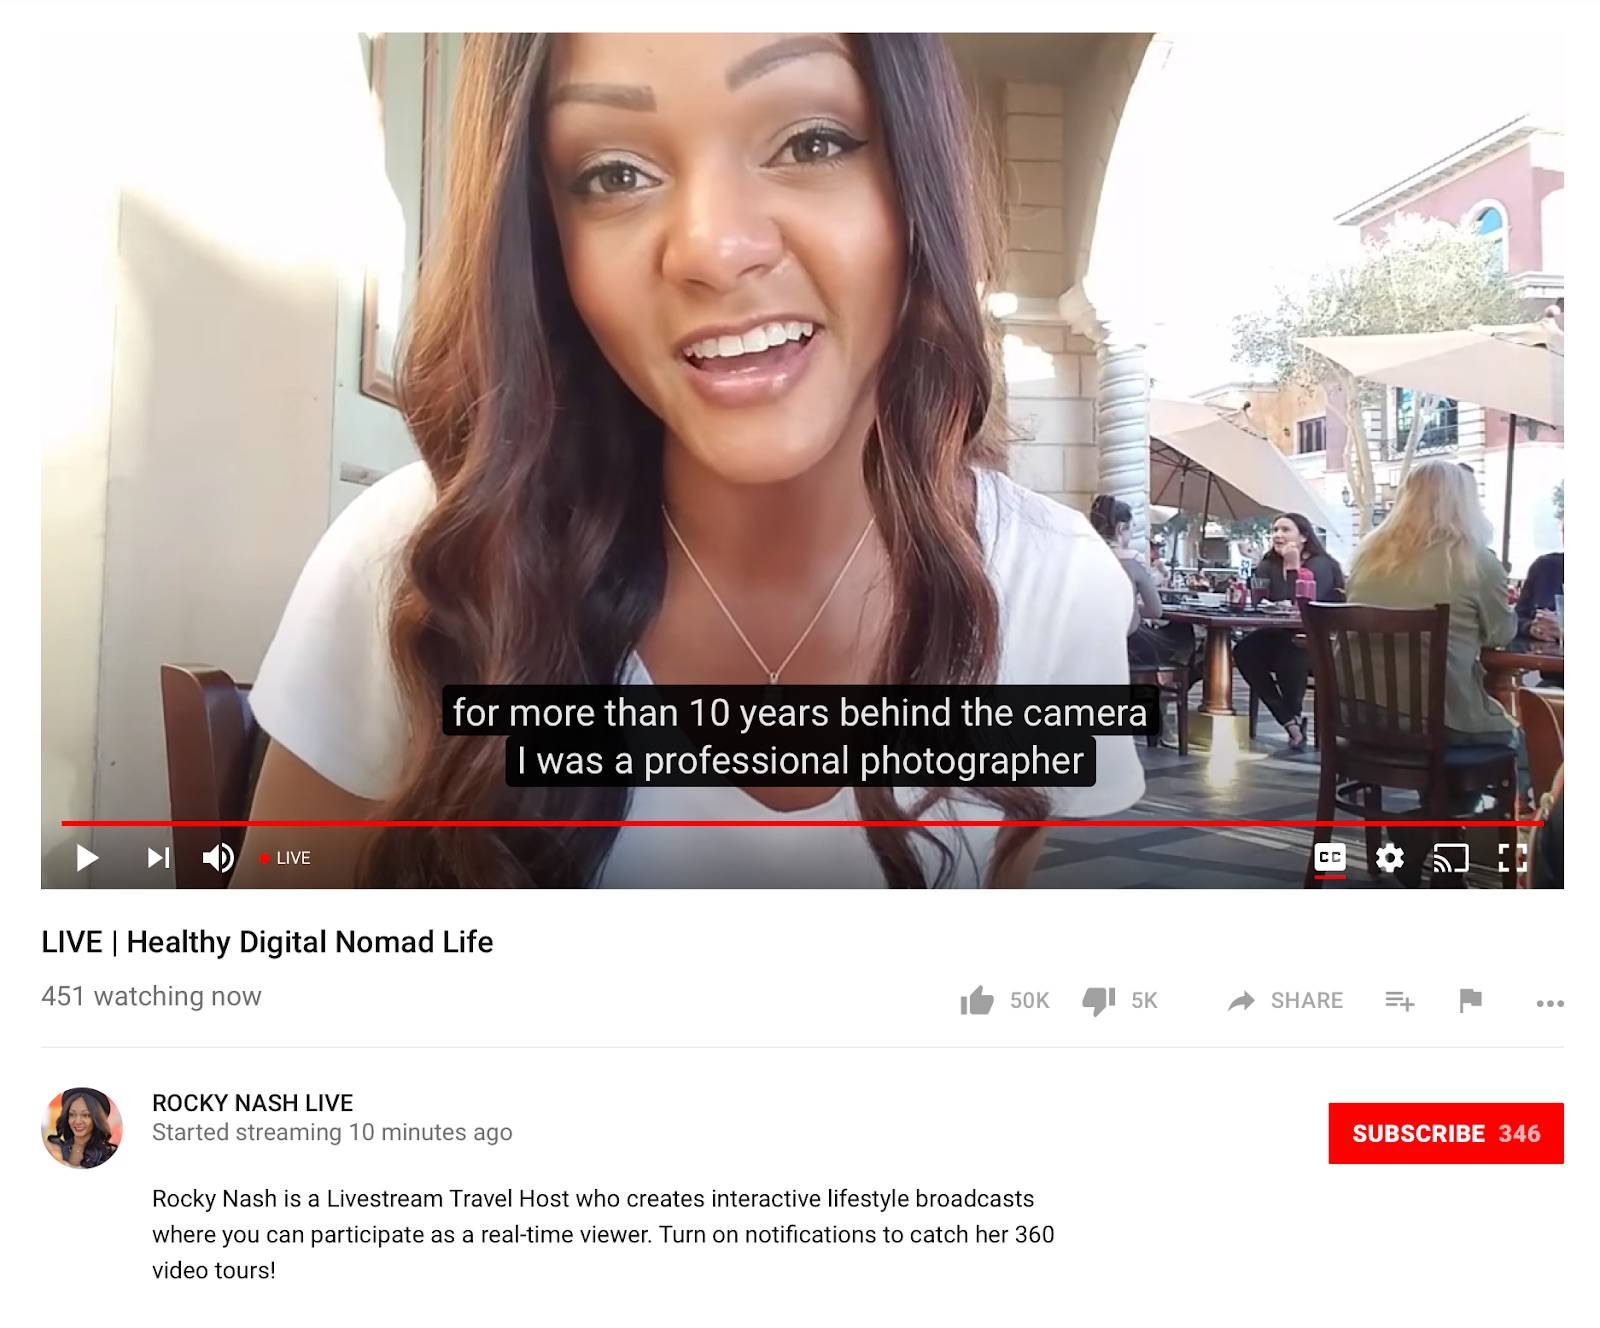 Youtube Live update: chat replay, automatic captions, location tags